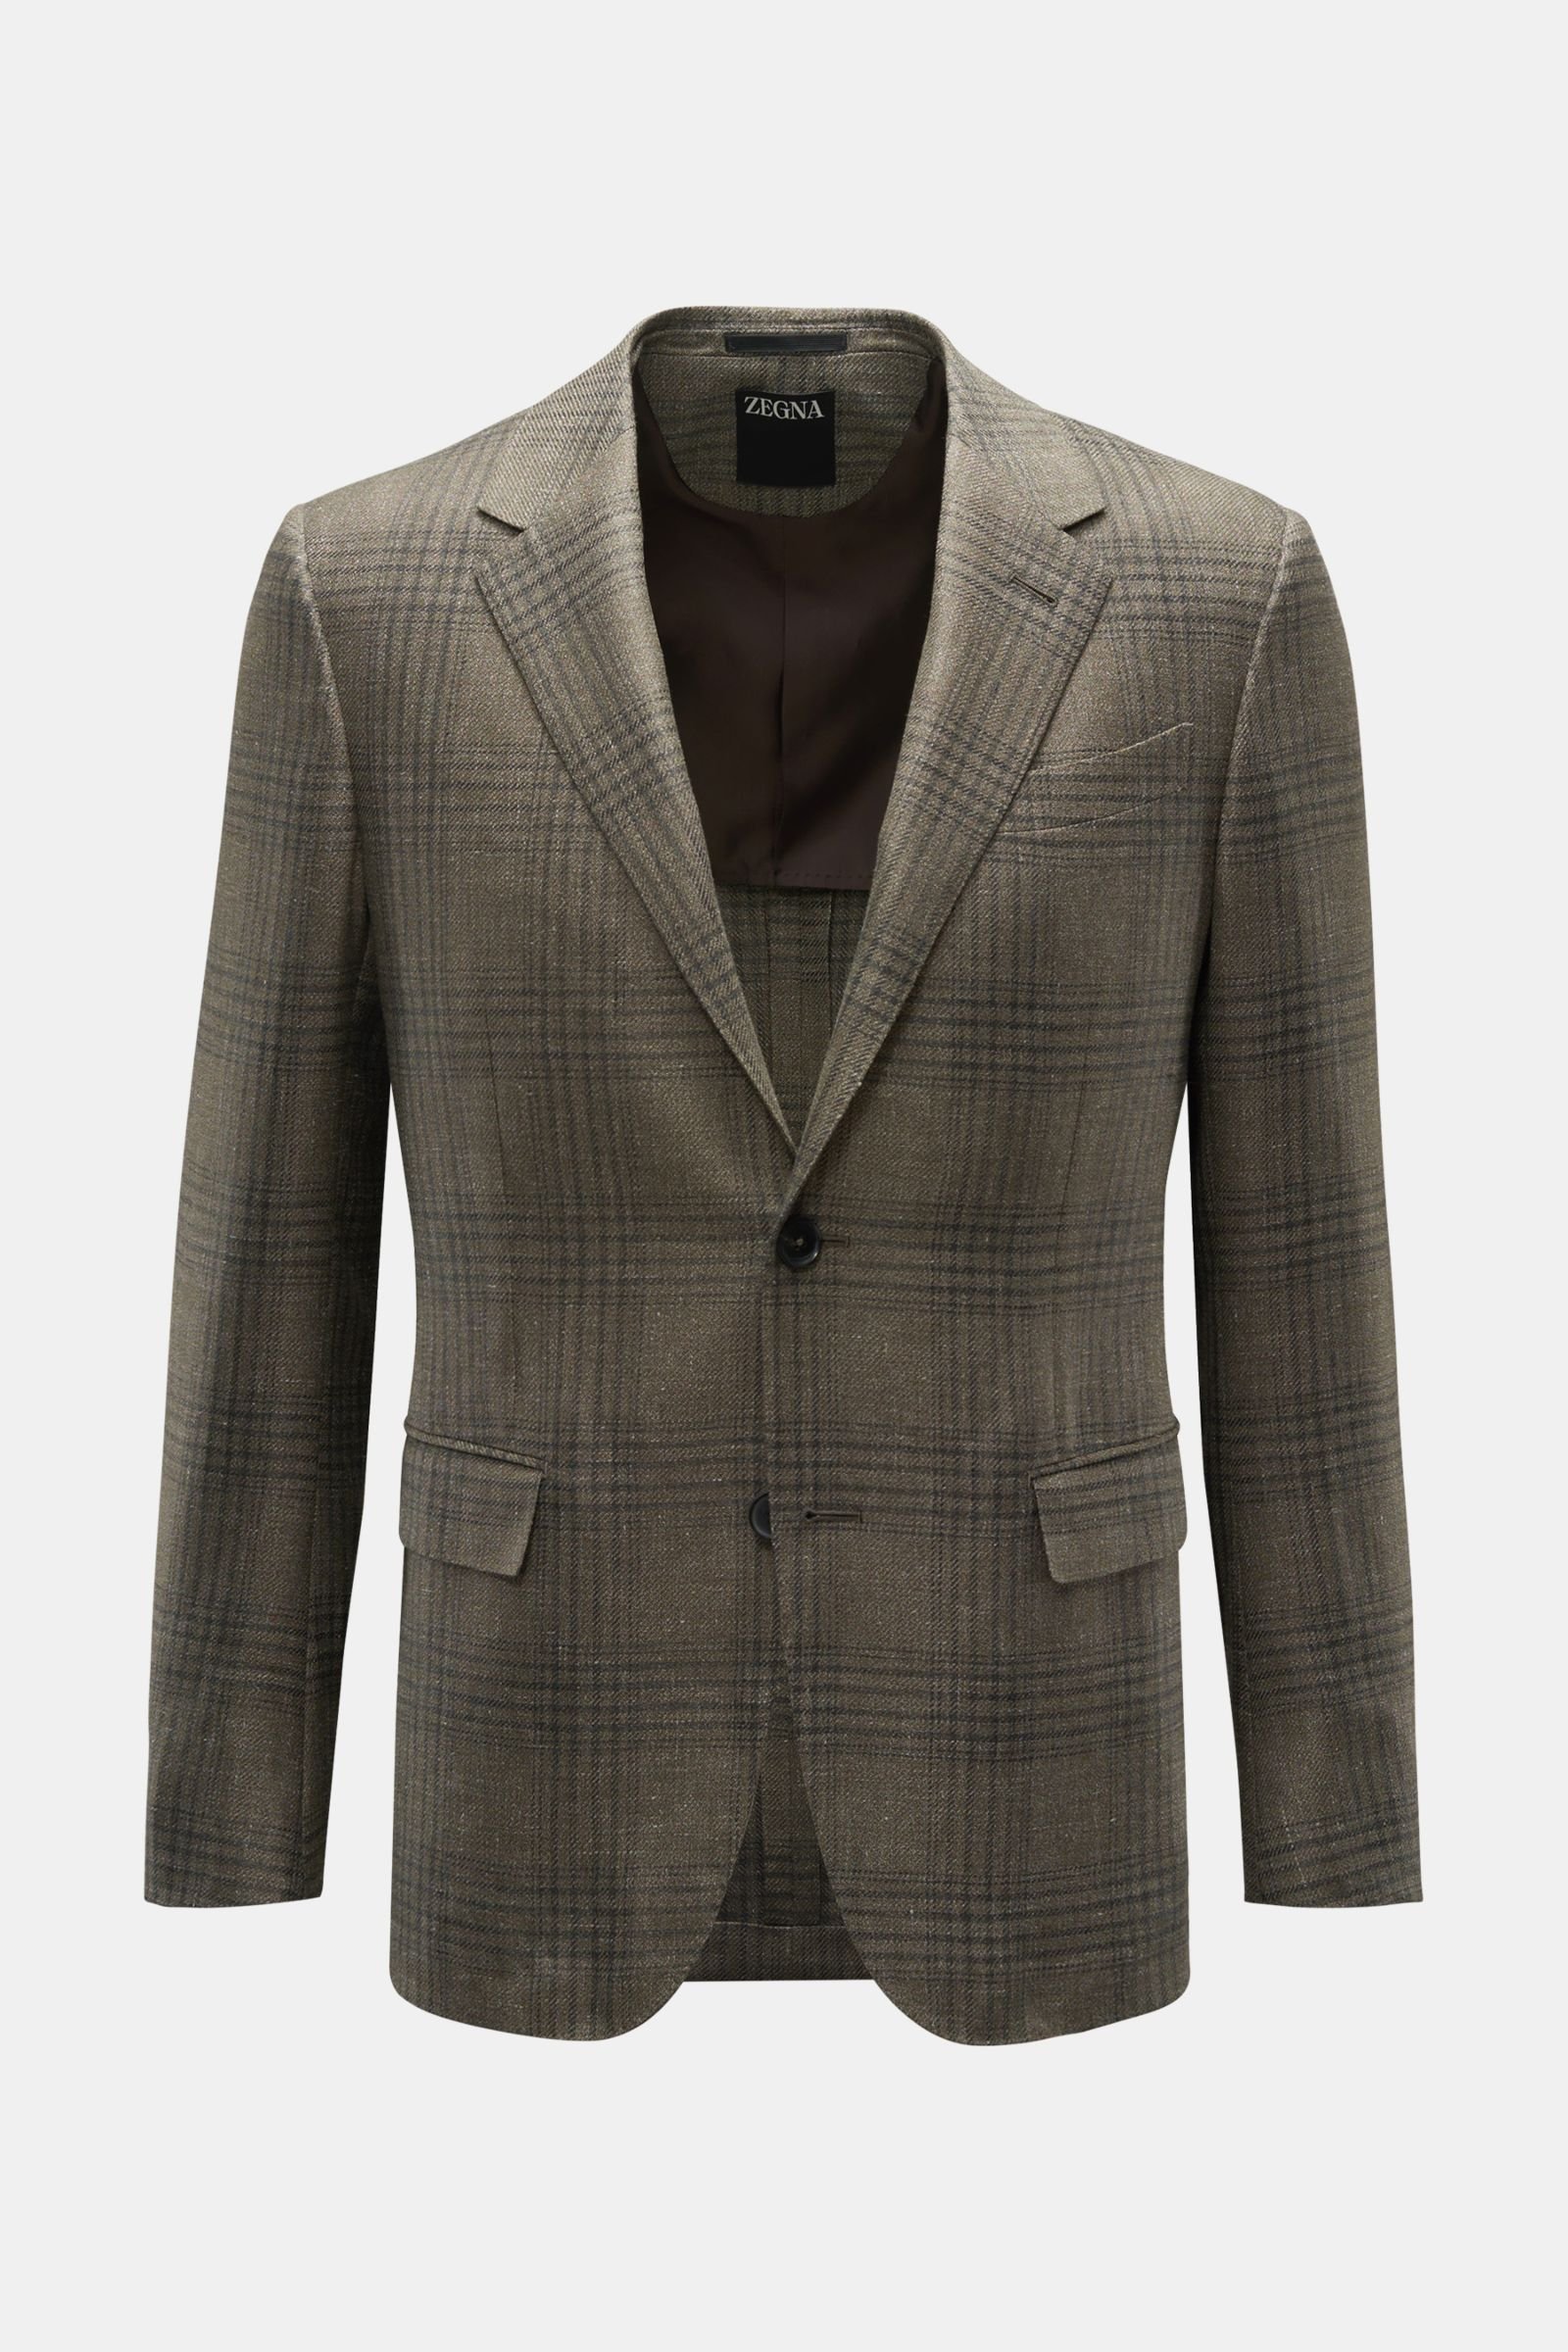 Smart-casual jacket grey-green/olive checked